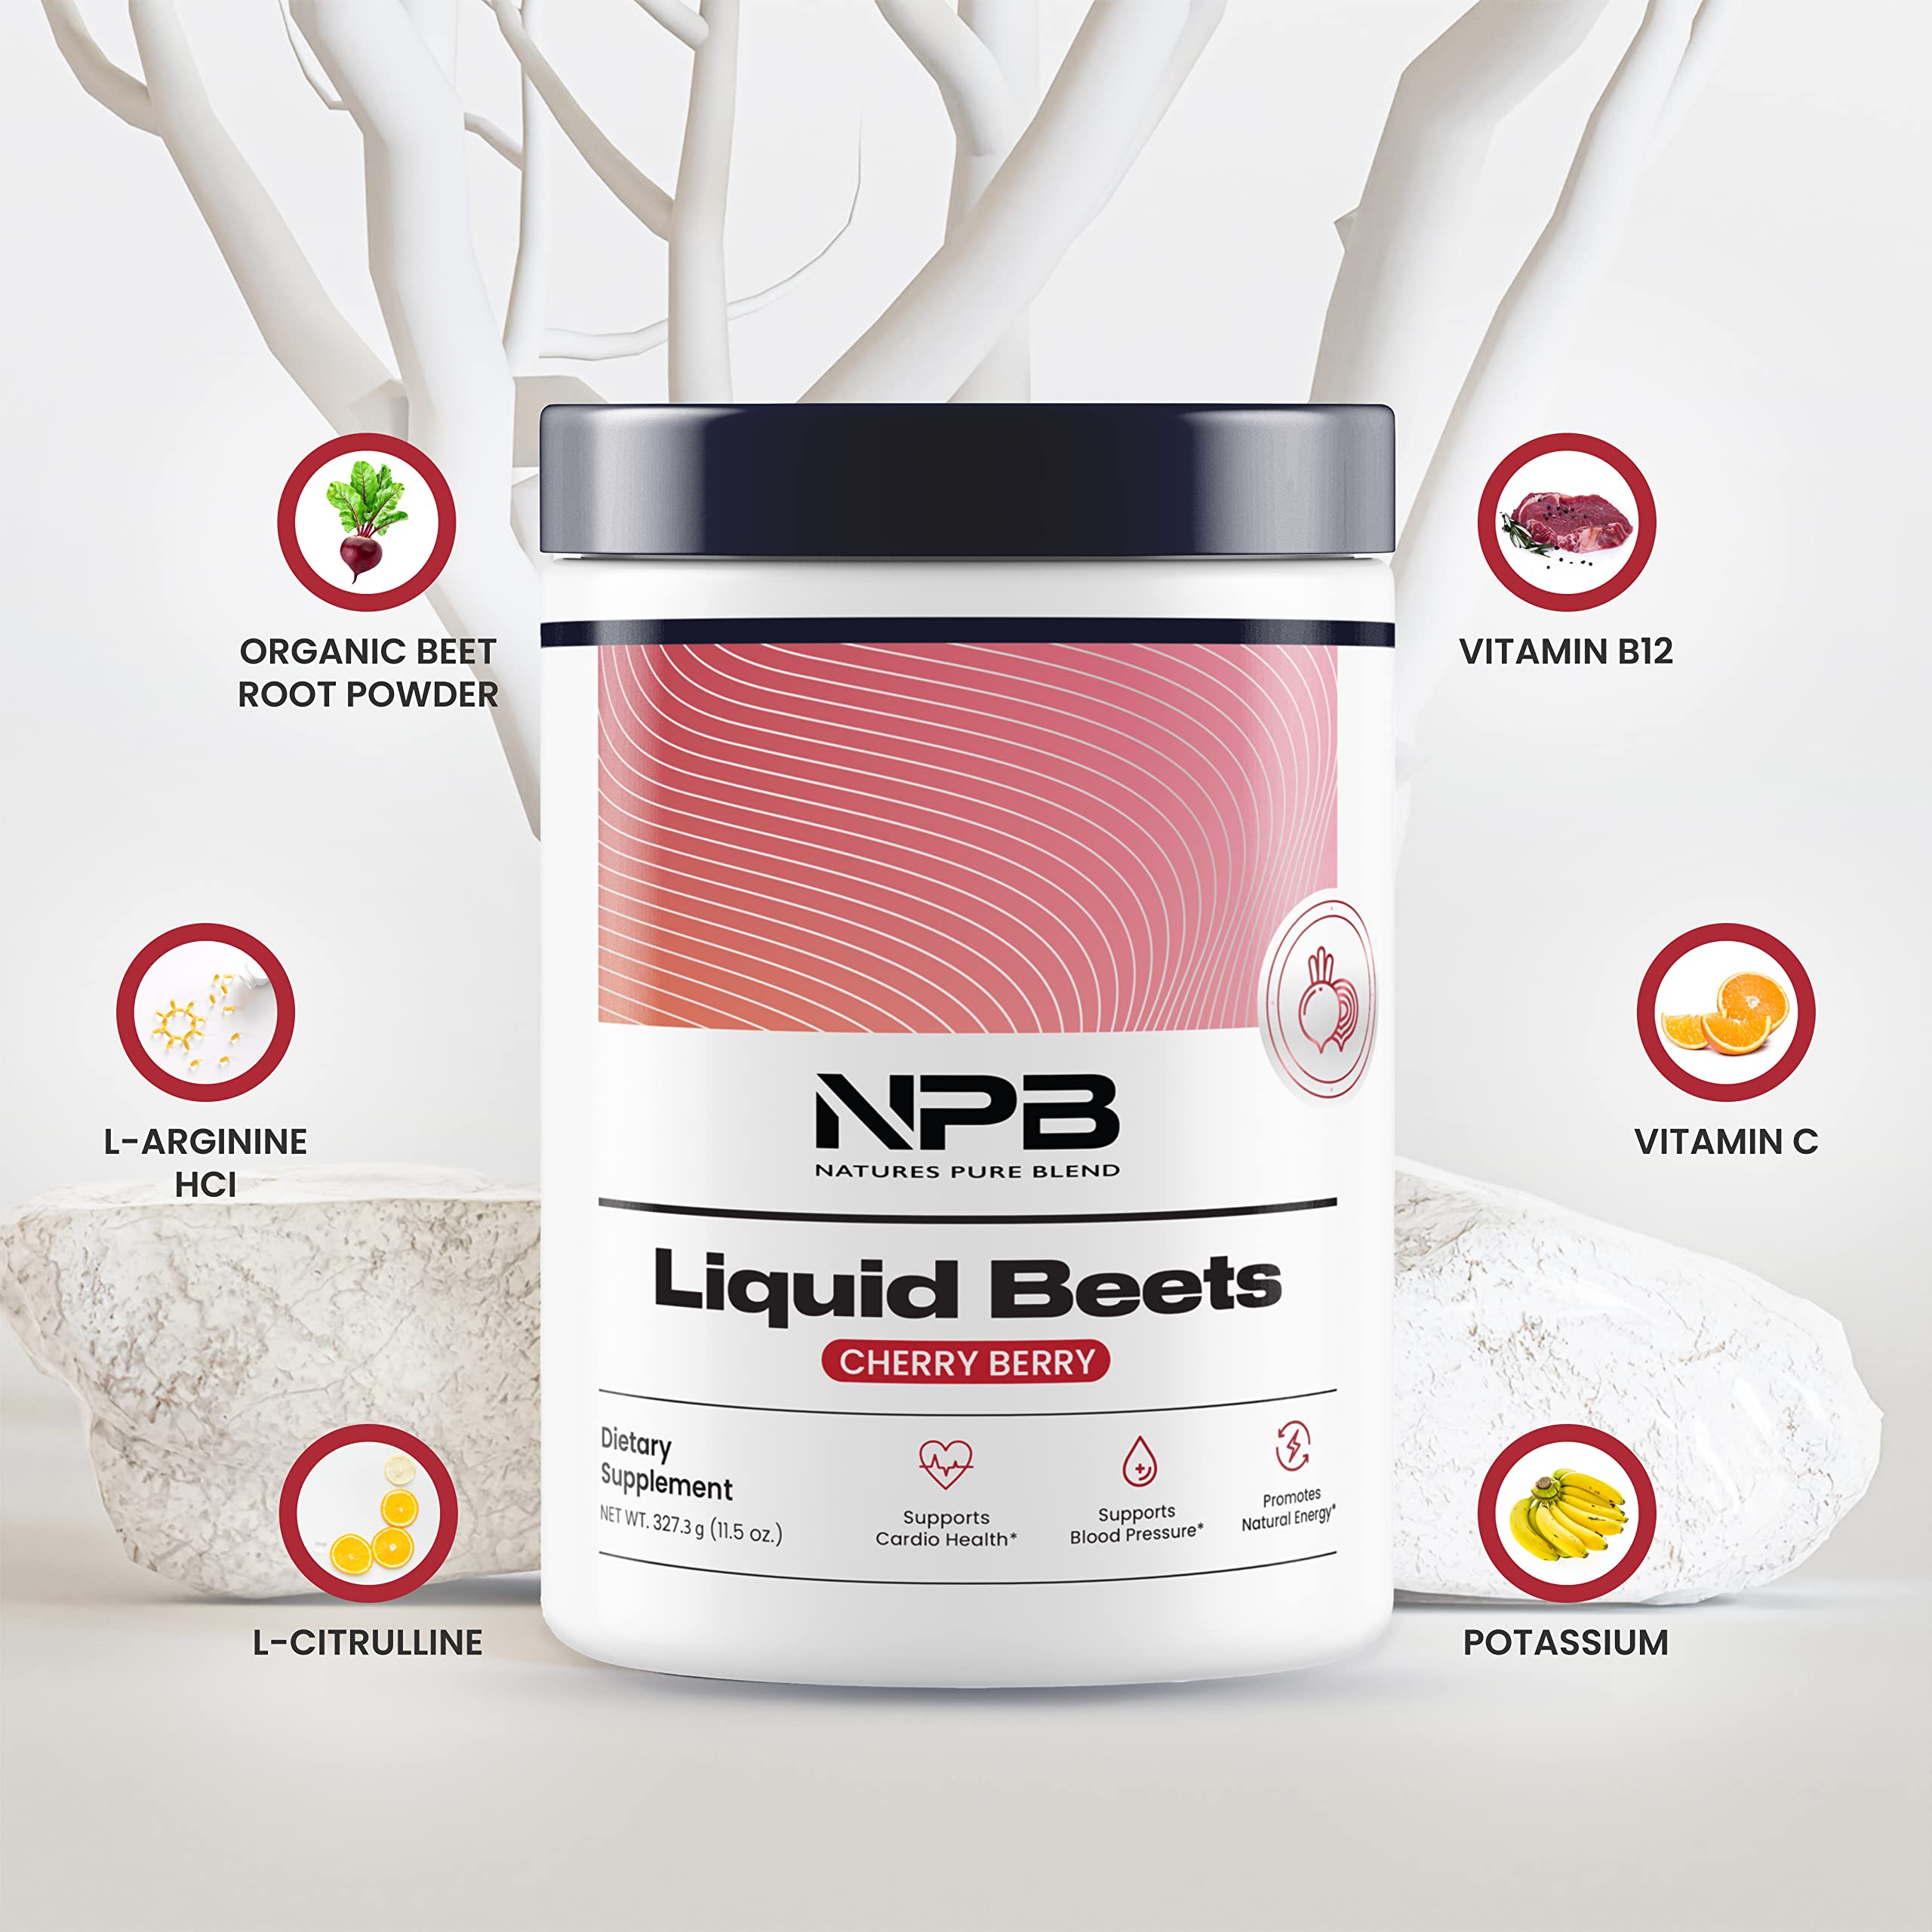 Nature's Pure Blend - Liquid Beets (8,000 MG Organic Beets), Support Blood Pressure, Blood Circulation, Heart Health - Energy - Nitric Oxide Supplement, L-Arginine - Cherry Berry Flavor (30 Servings)